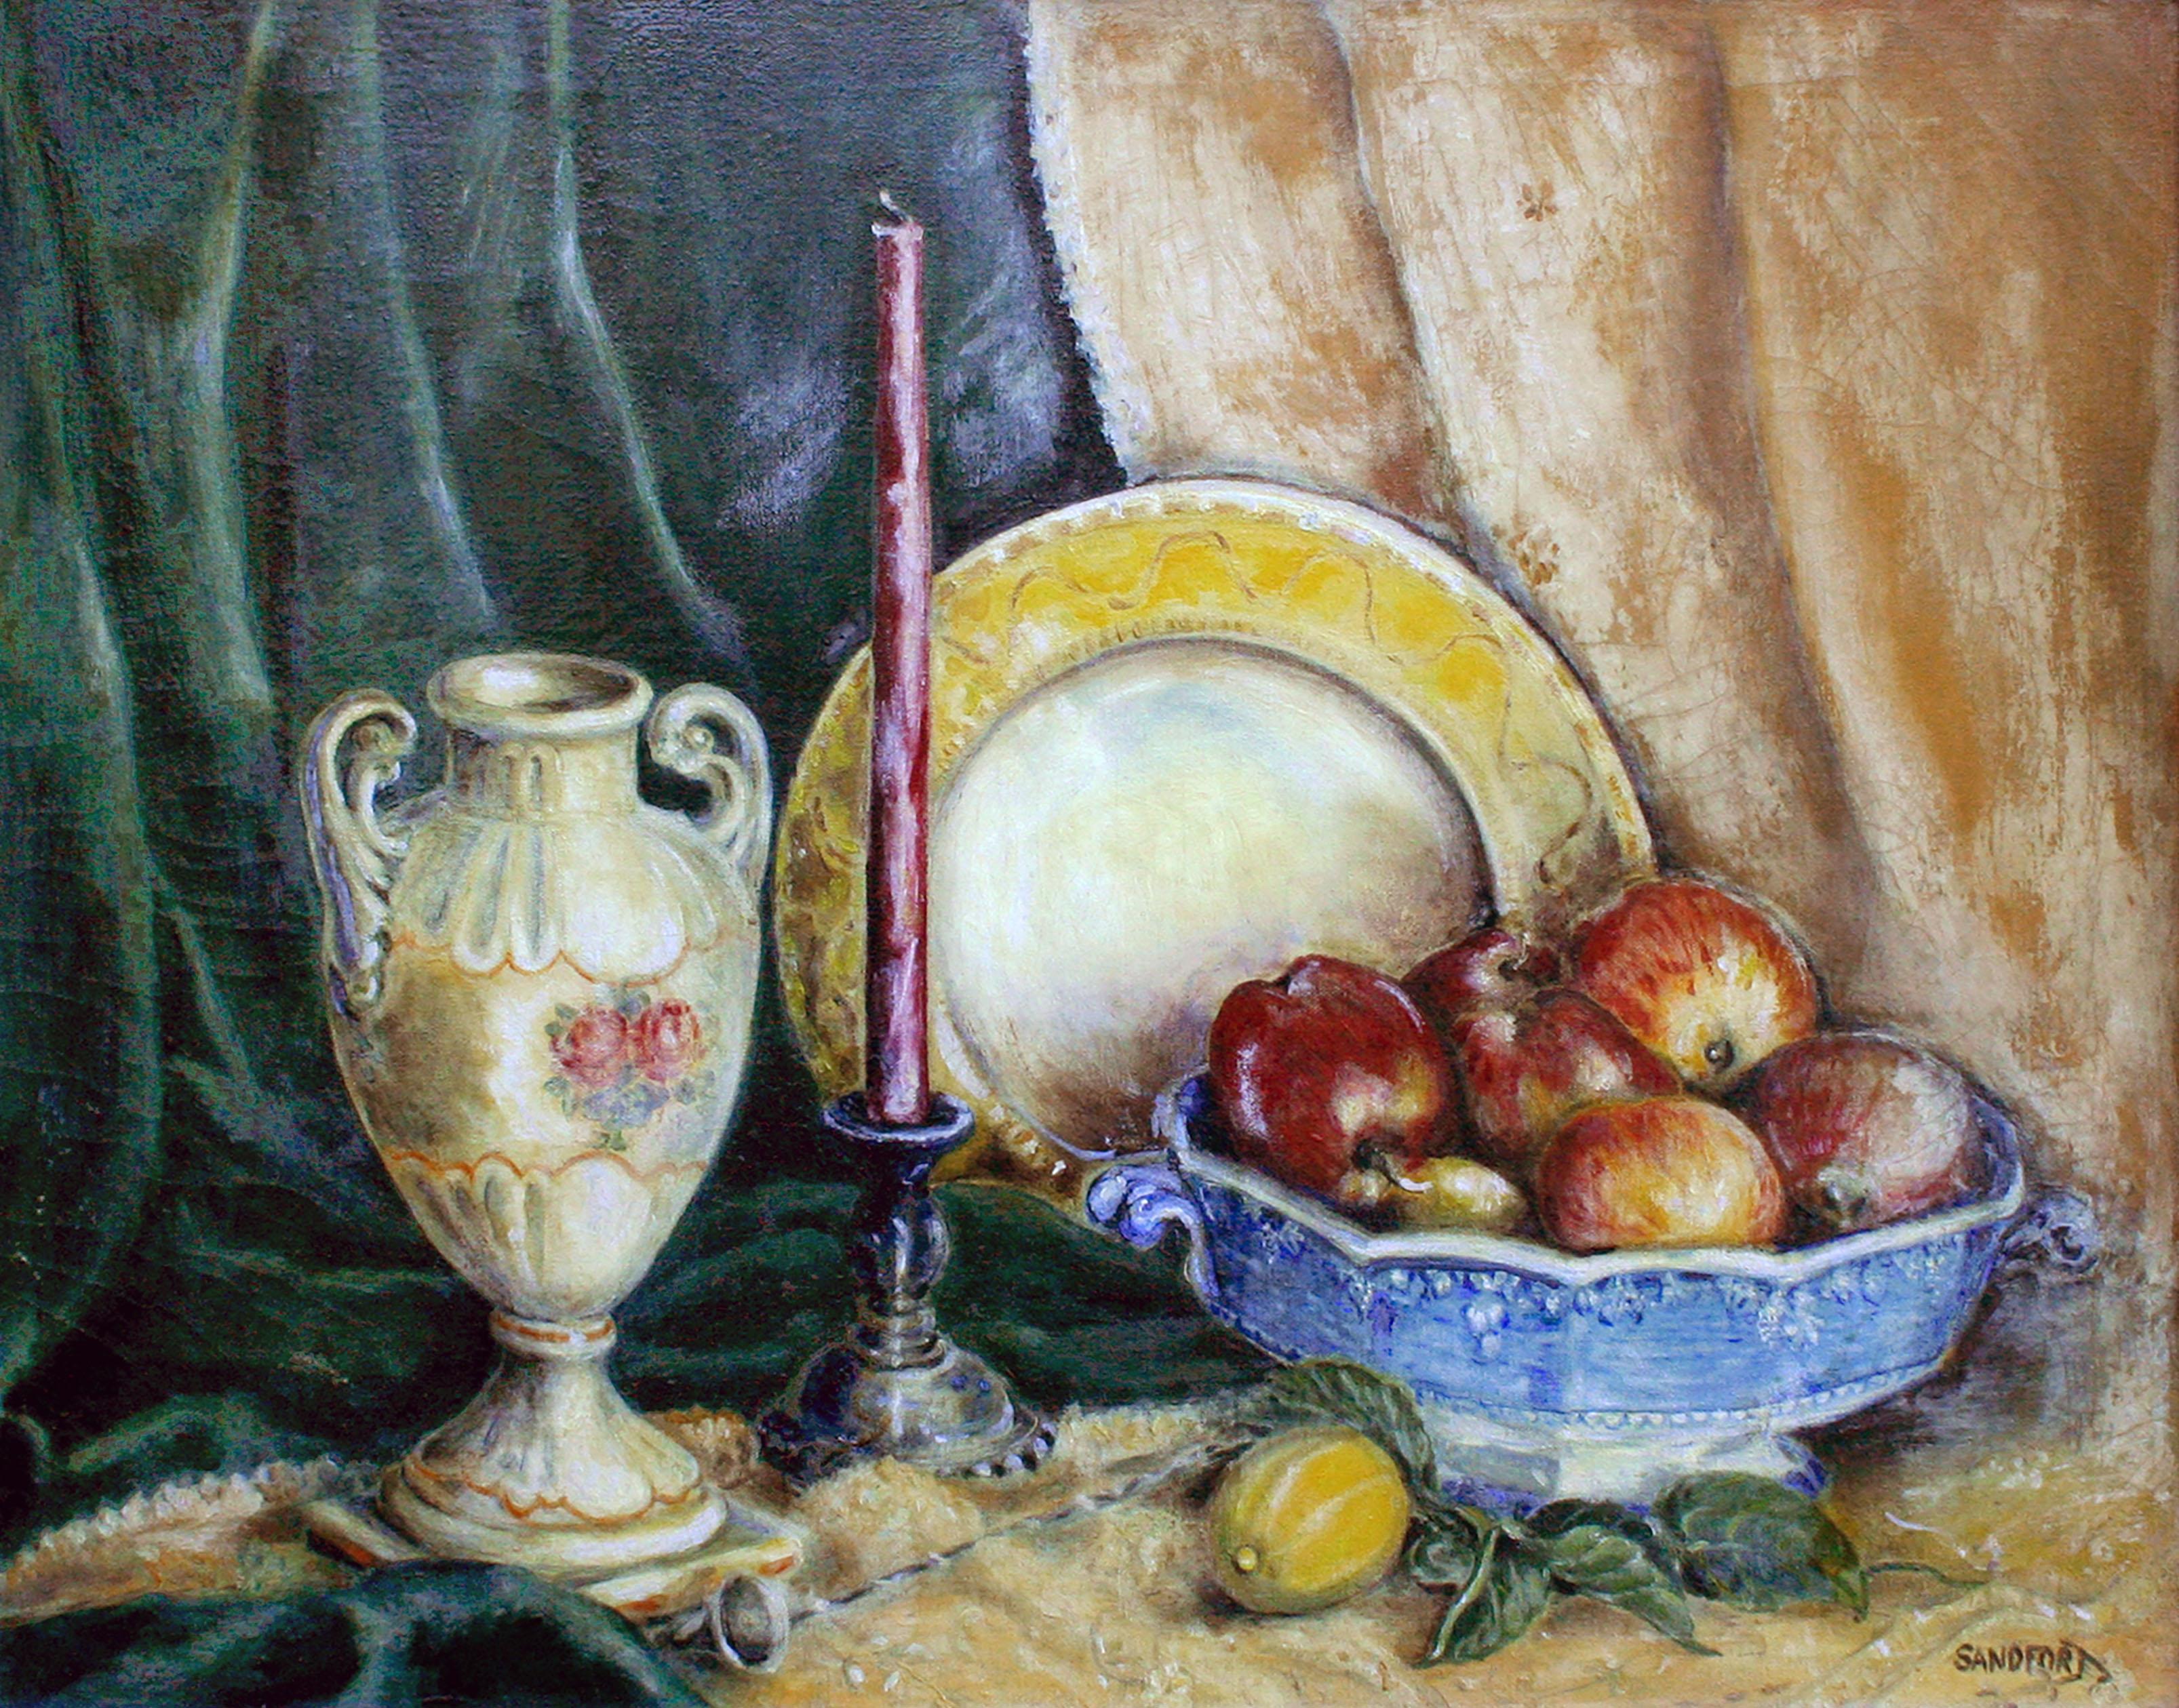 Mid Century Still Life -- Antiques and Apples - Painting by Florence C. Sandfort